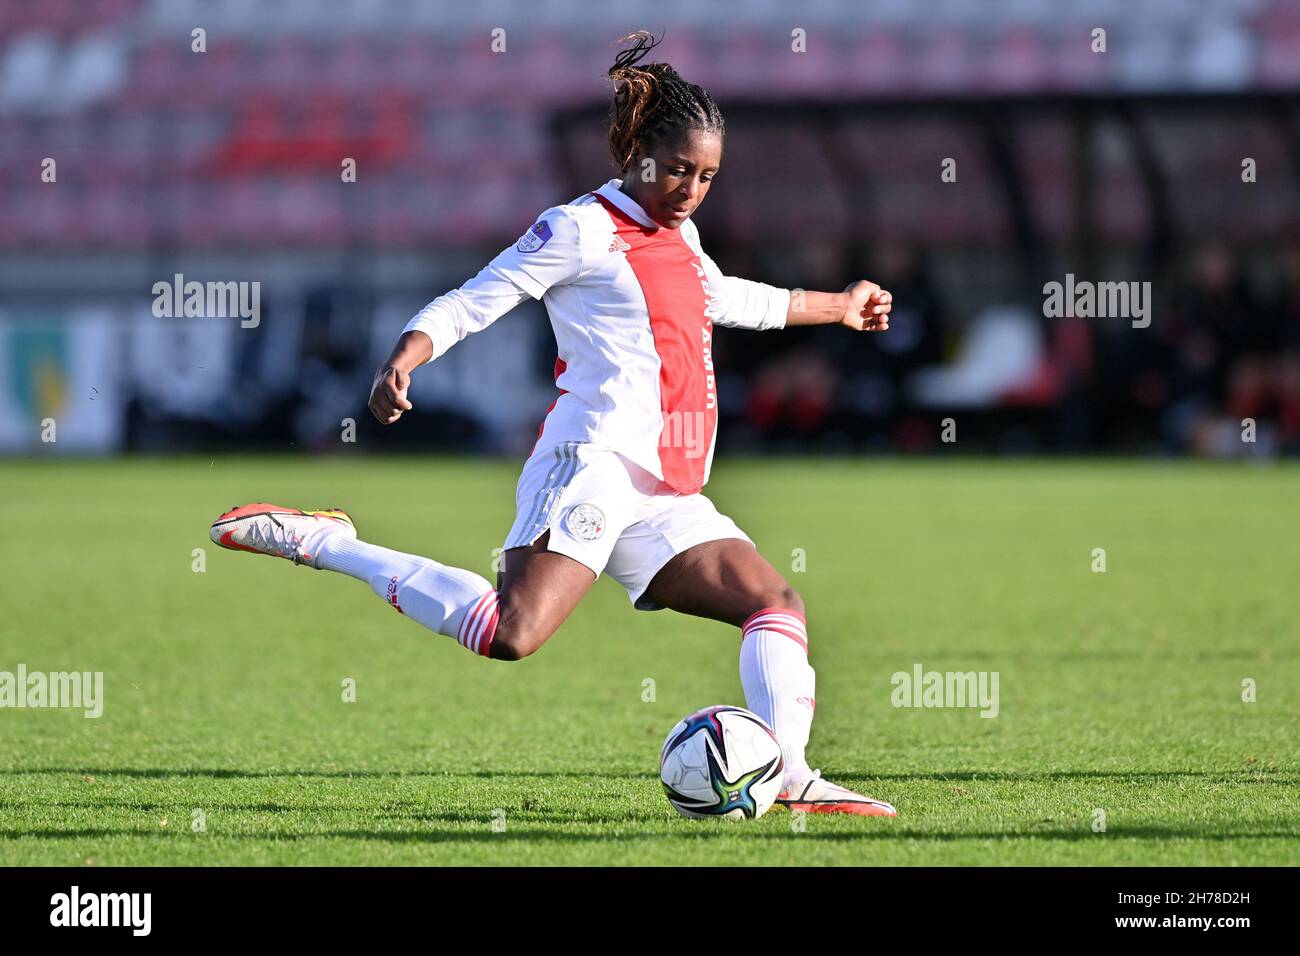 DUIVENDRECHT, NETHERLANDS - NOVEMBER 21: Liza van der Most of Ajax during the Women's Pure Energie Eredivisie match between Ajax and SBV Excelsior at the Sportcomplex de Toekomst on November 21, 2021 in Duivendrecht, Netherlands (Photo by Patrick Goosen/Orange Pictures) Stock Photo